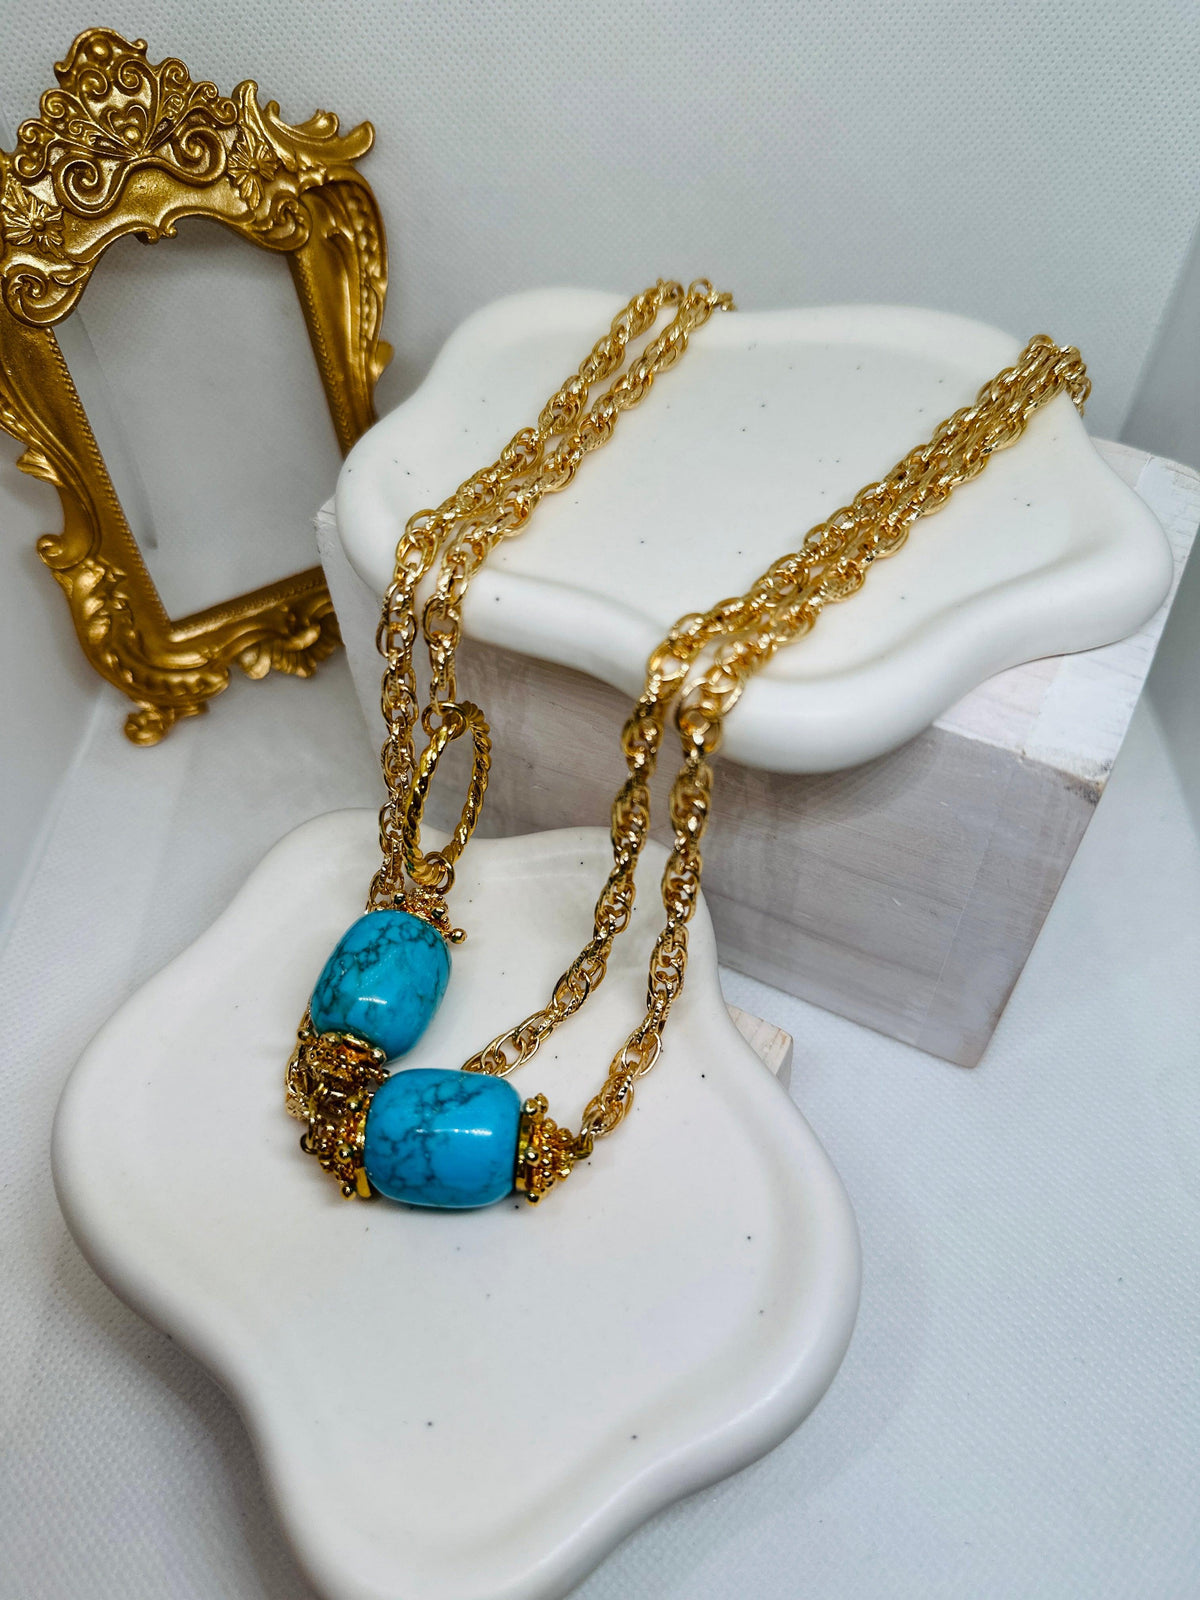 Samira Light Long Necklace with Turquoise - Penelope Made This 